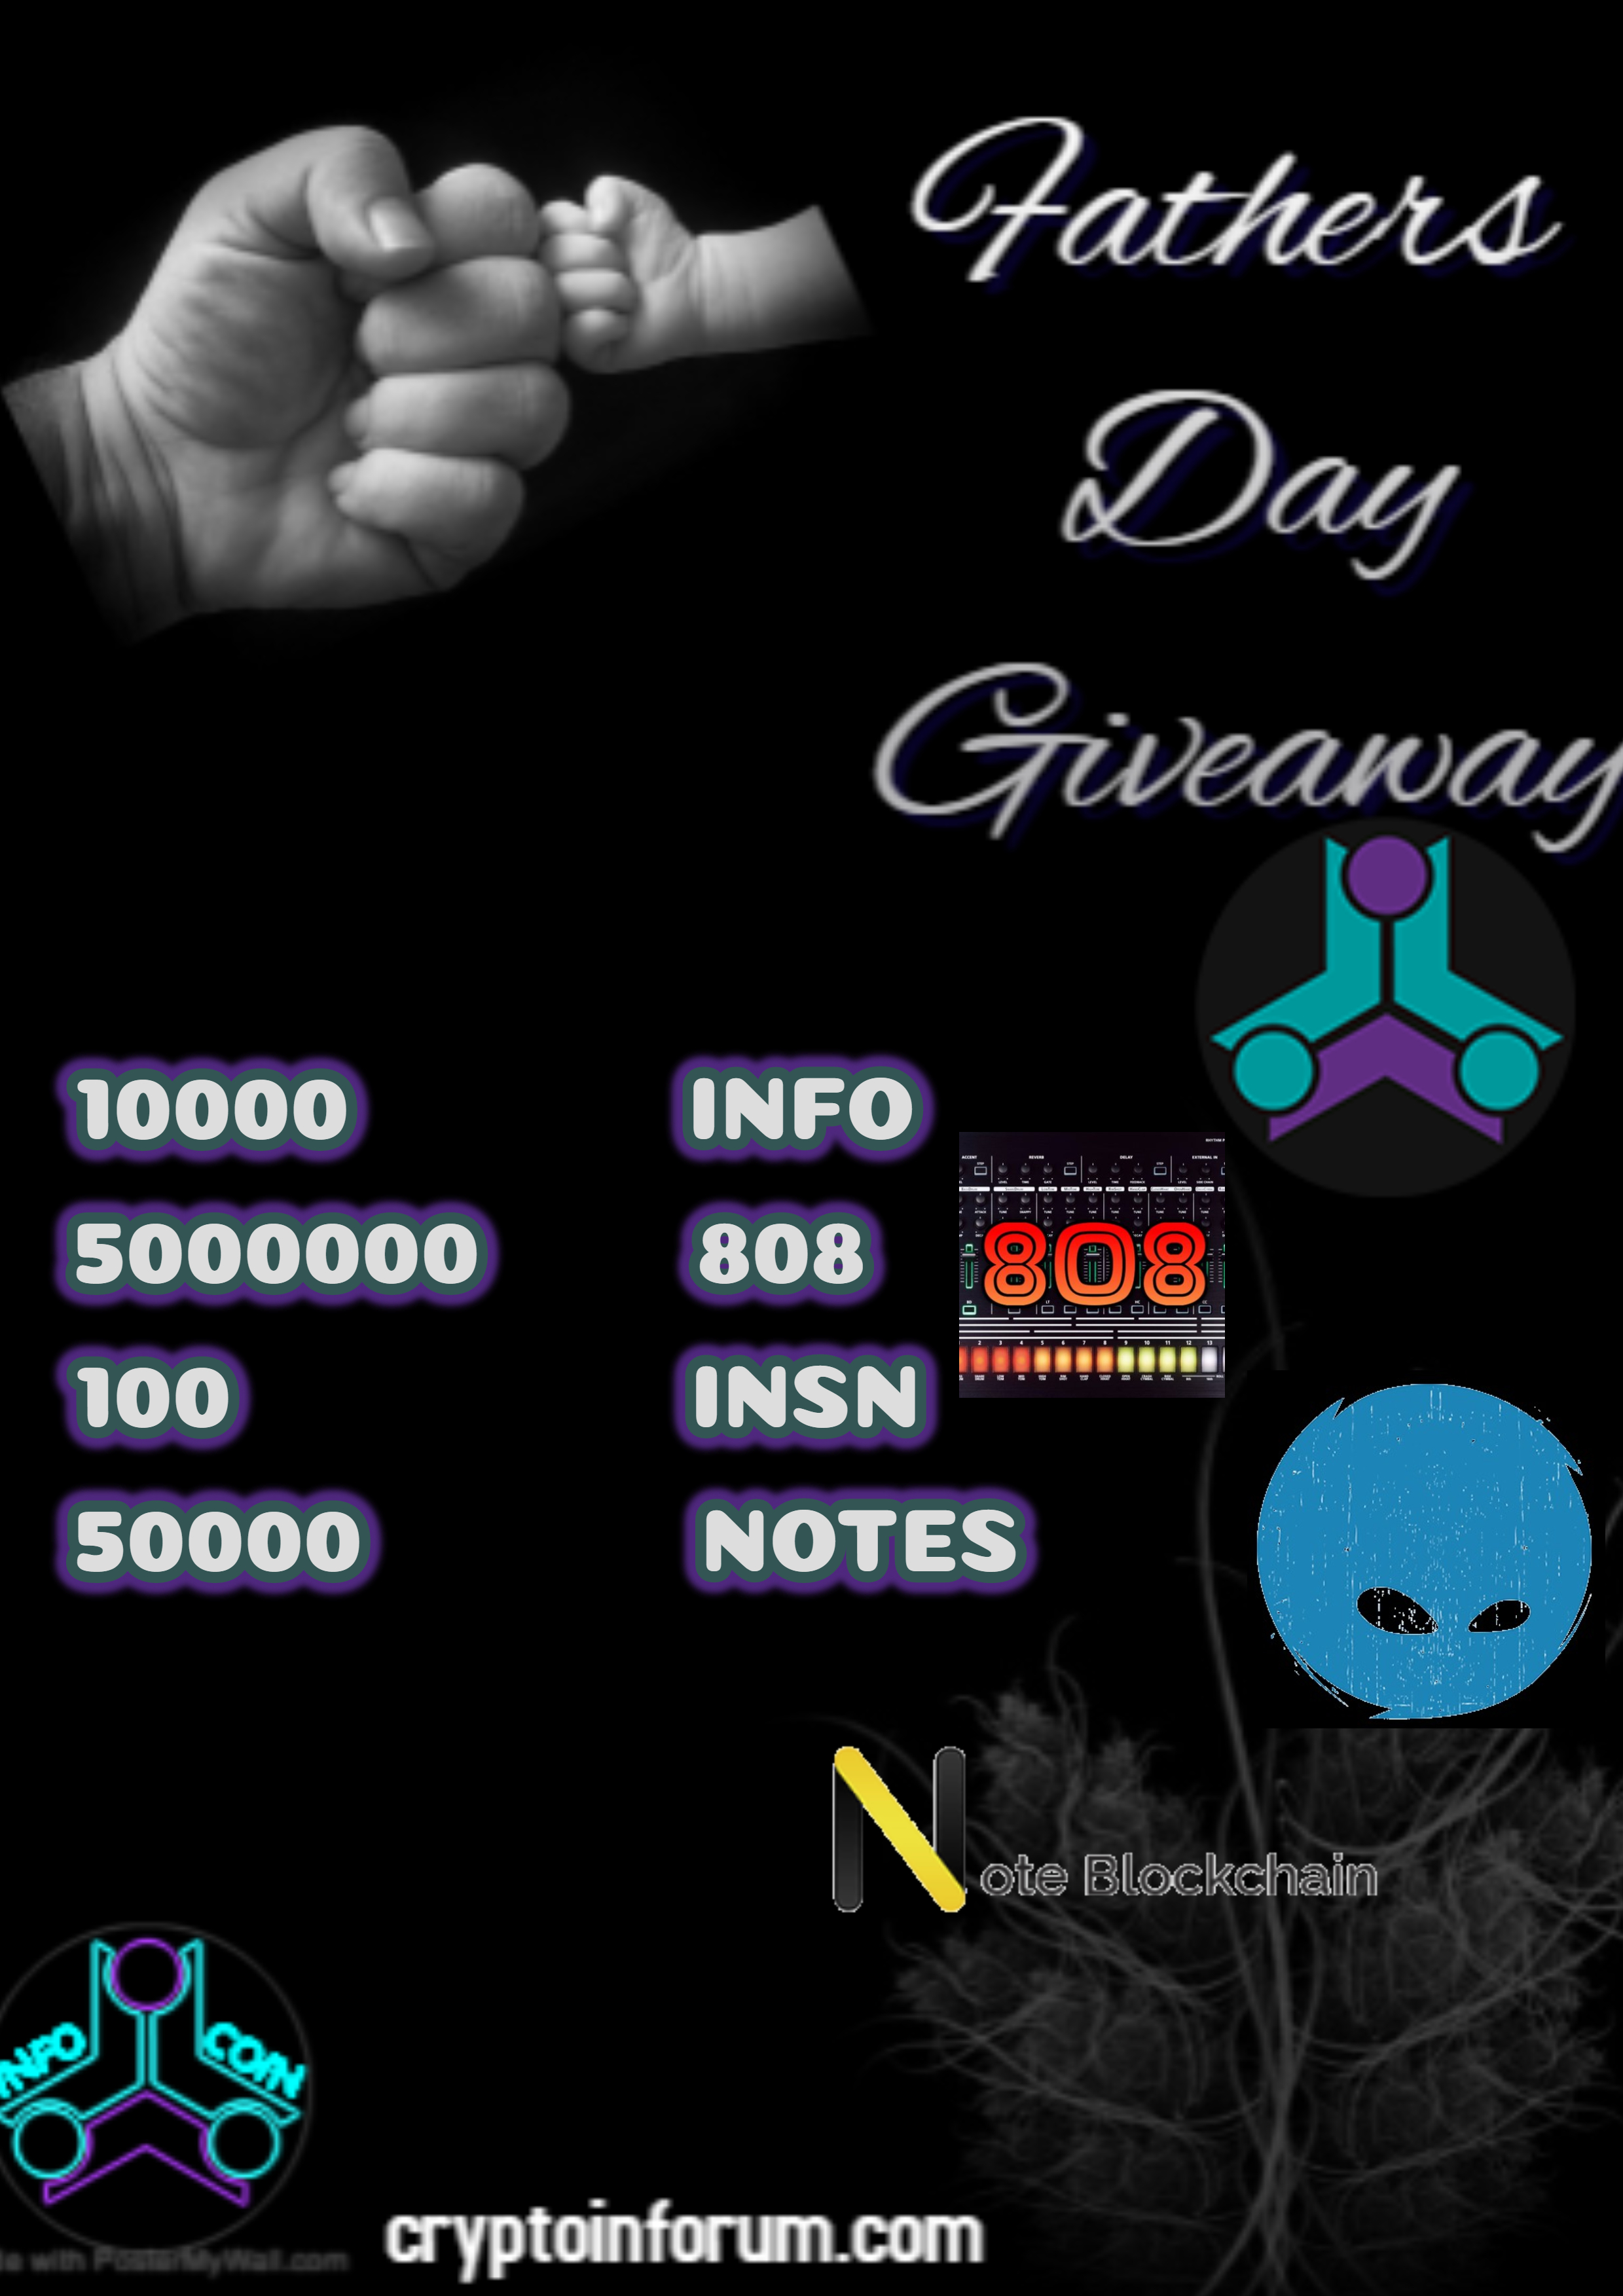 Fathers day Giveaway  image